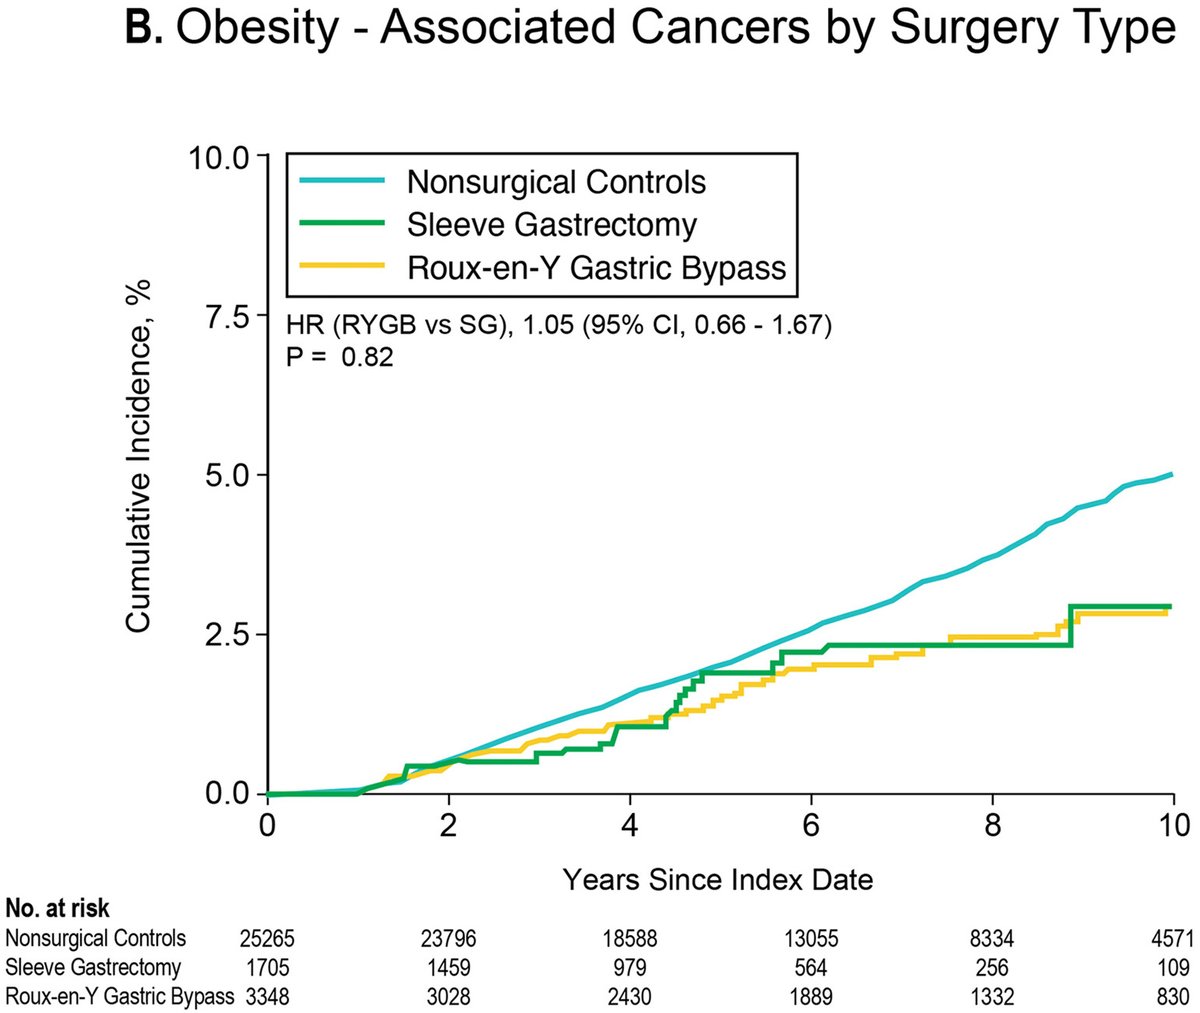 SPLENDID 10-yr study comparing 5,053 #MetabolicSurgery pts vs 25,265 Non-surgical cohort… 32% decrease risk of developing obesity-associated cancer over a 10-year period following metabolic surgery (no difference in SG (2.9%) vs RYGB (2.9%)!!! Great study @Ali_Aminian_MD @ASMBS